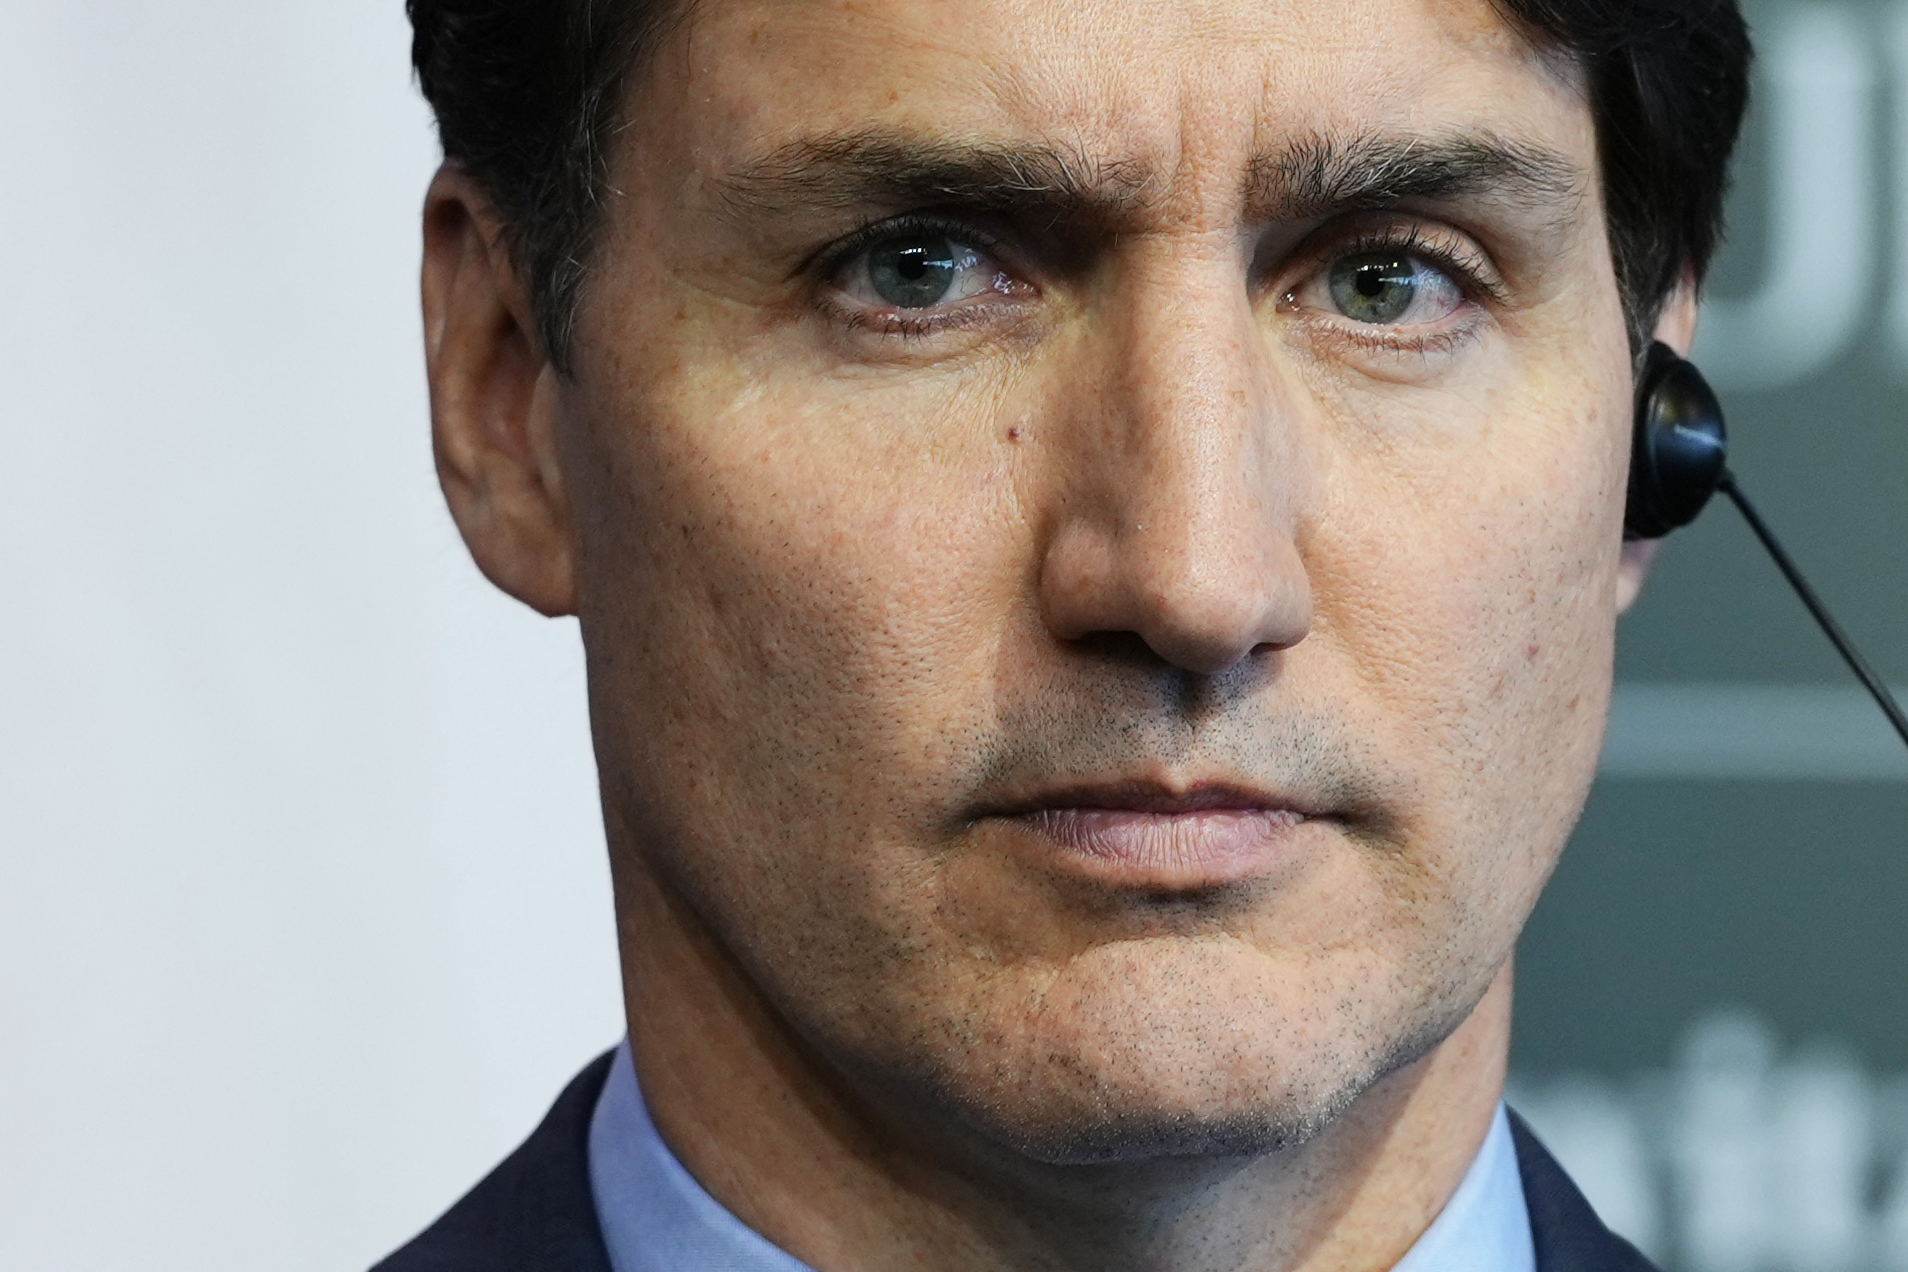 The biggest controversies of Justin Trudeau's career